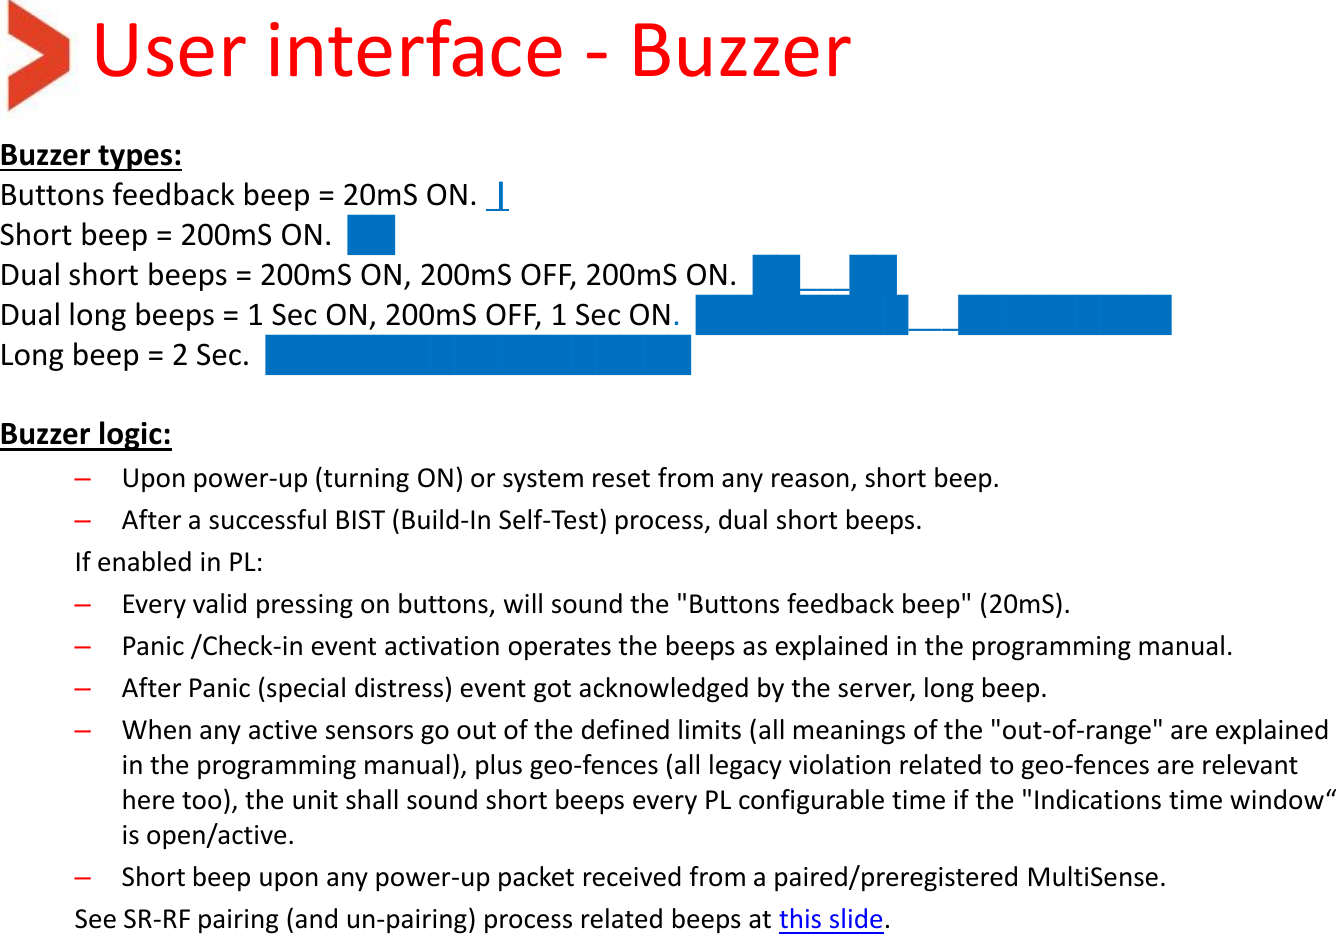 User interface - Buzzer Buzzer types: Buttons feedback beep = 20mS ON.  | Short beep = 200mS ON.  ██ Dual short beeps = 200mS ON, 200mS OFF, 200mS ON.  ██___██ Dual long beeps = 1 Sec ON, 200mS OFF, 1 Sec ON.  █████████___█████████ Long beep = 2 Sec.  ██████████████████  Buzzer logic: –Upon power-up (turning ON) or system reset from any reason, short beep.  –After a successful BIST (Build-In Self-Test) process, dual short beeps. If enabled in PL: –Every valid pressing on buttons, will sound the &quot;Buttons feedback beep&quot; (20mS). –Panic /Check-in event activation operates the beeps as explained in the programming manual. –After Panic (special distress) event got acknowledged by the server, long beep. –When any active sensors go out of the defined limits (all meanings of the &quot;out-of-range&quot; are explained in the programming manual), plus geo-fences (all legacy violation related to geo-fences are relevant here too), the unit shall sound short beeps every PL configurable time if the &quot;Indications time window“ is open/active. –Short beep upon any power-up packet received from a paired/preregistered MultiSense.  See SR-RF pairing (and un-pairing) process related beeps at this slide.   